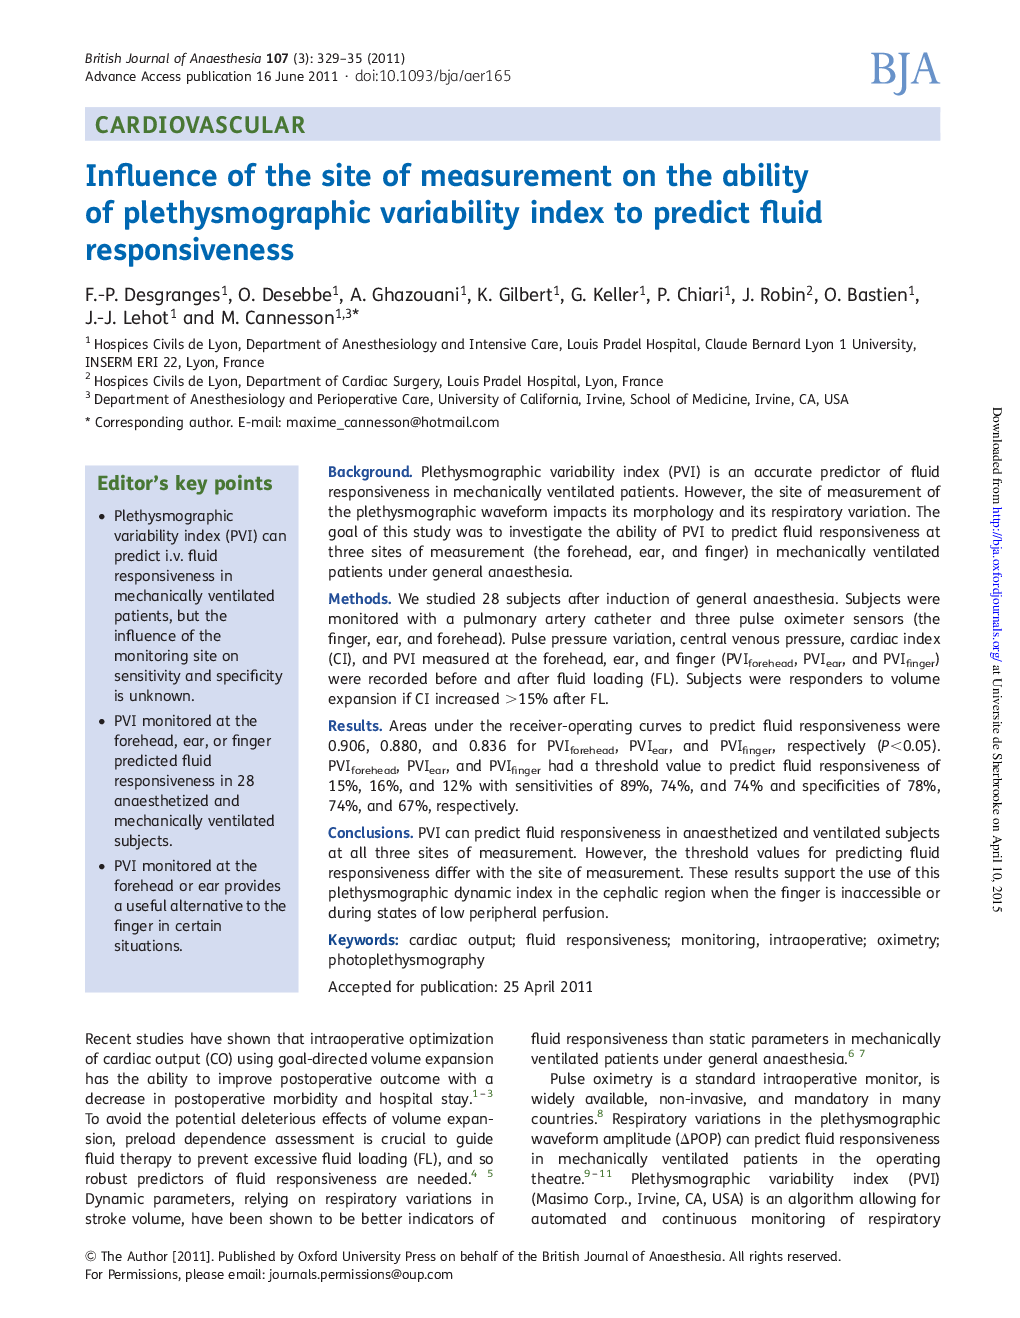 Influence of the site of measurement on the ability of plethysmographic variability index to predict fluid responsiveness